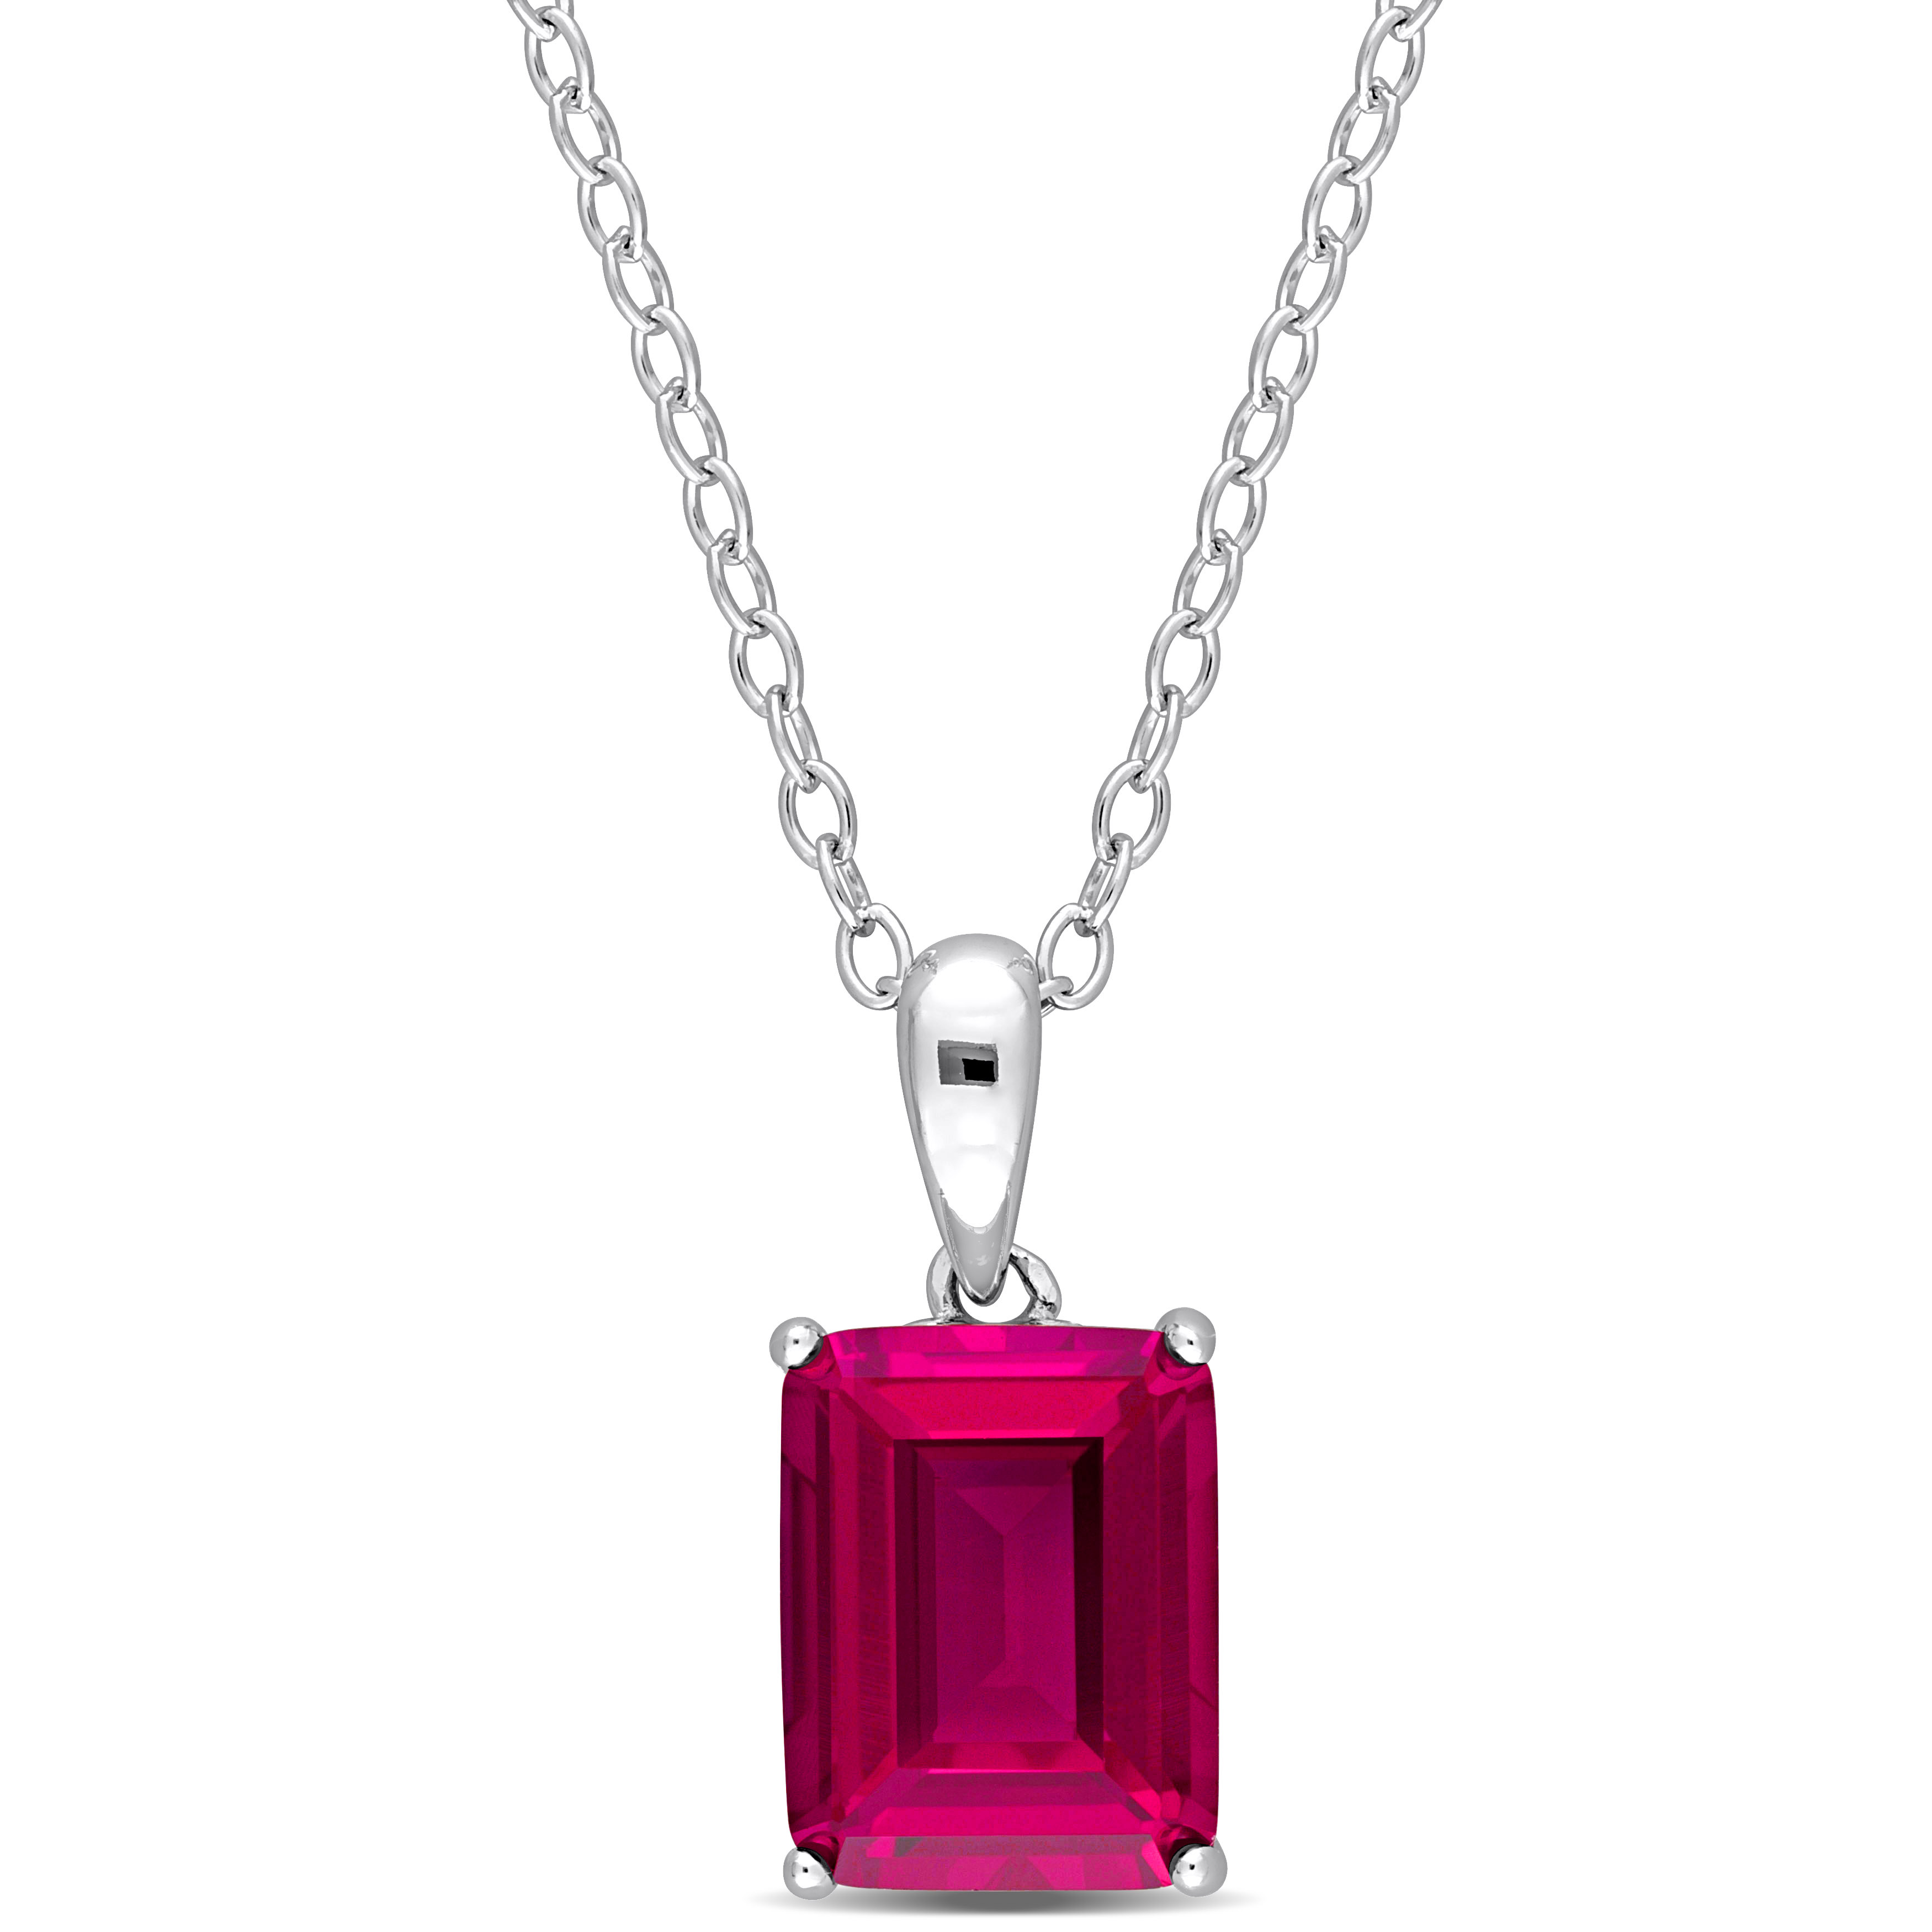 3 3/4 CT TGW Emerald Cut Created Ruby Solitaire Heart Design Pendant with Chain in Sterling Silver - 18 in.